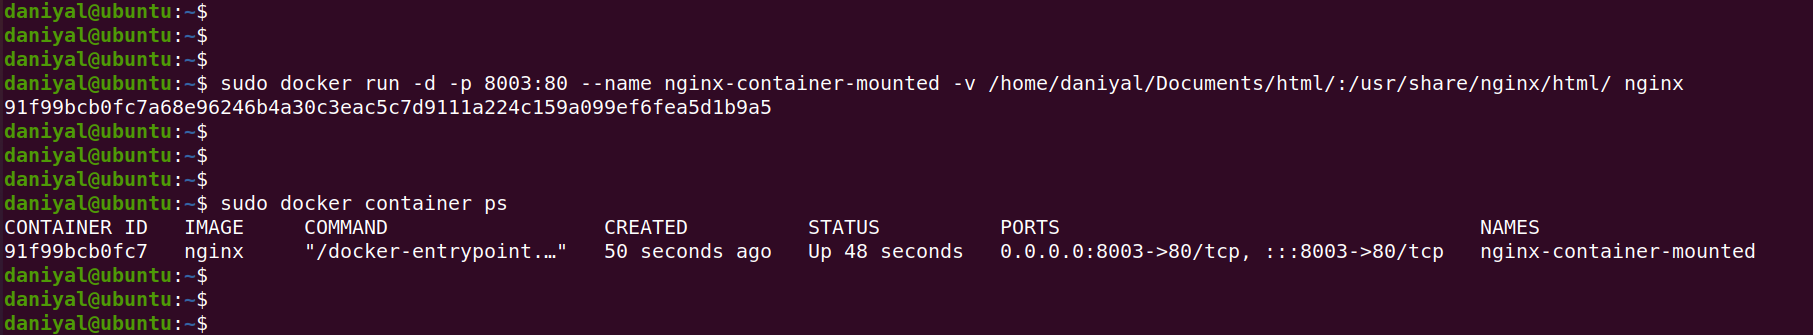 Running Nginx Container With Mounting Volume in Docker Container